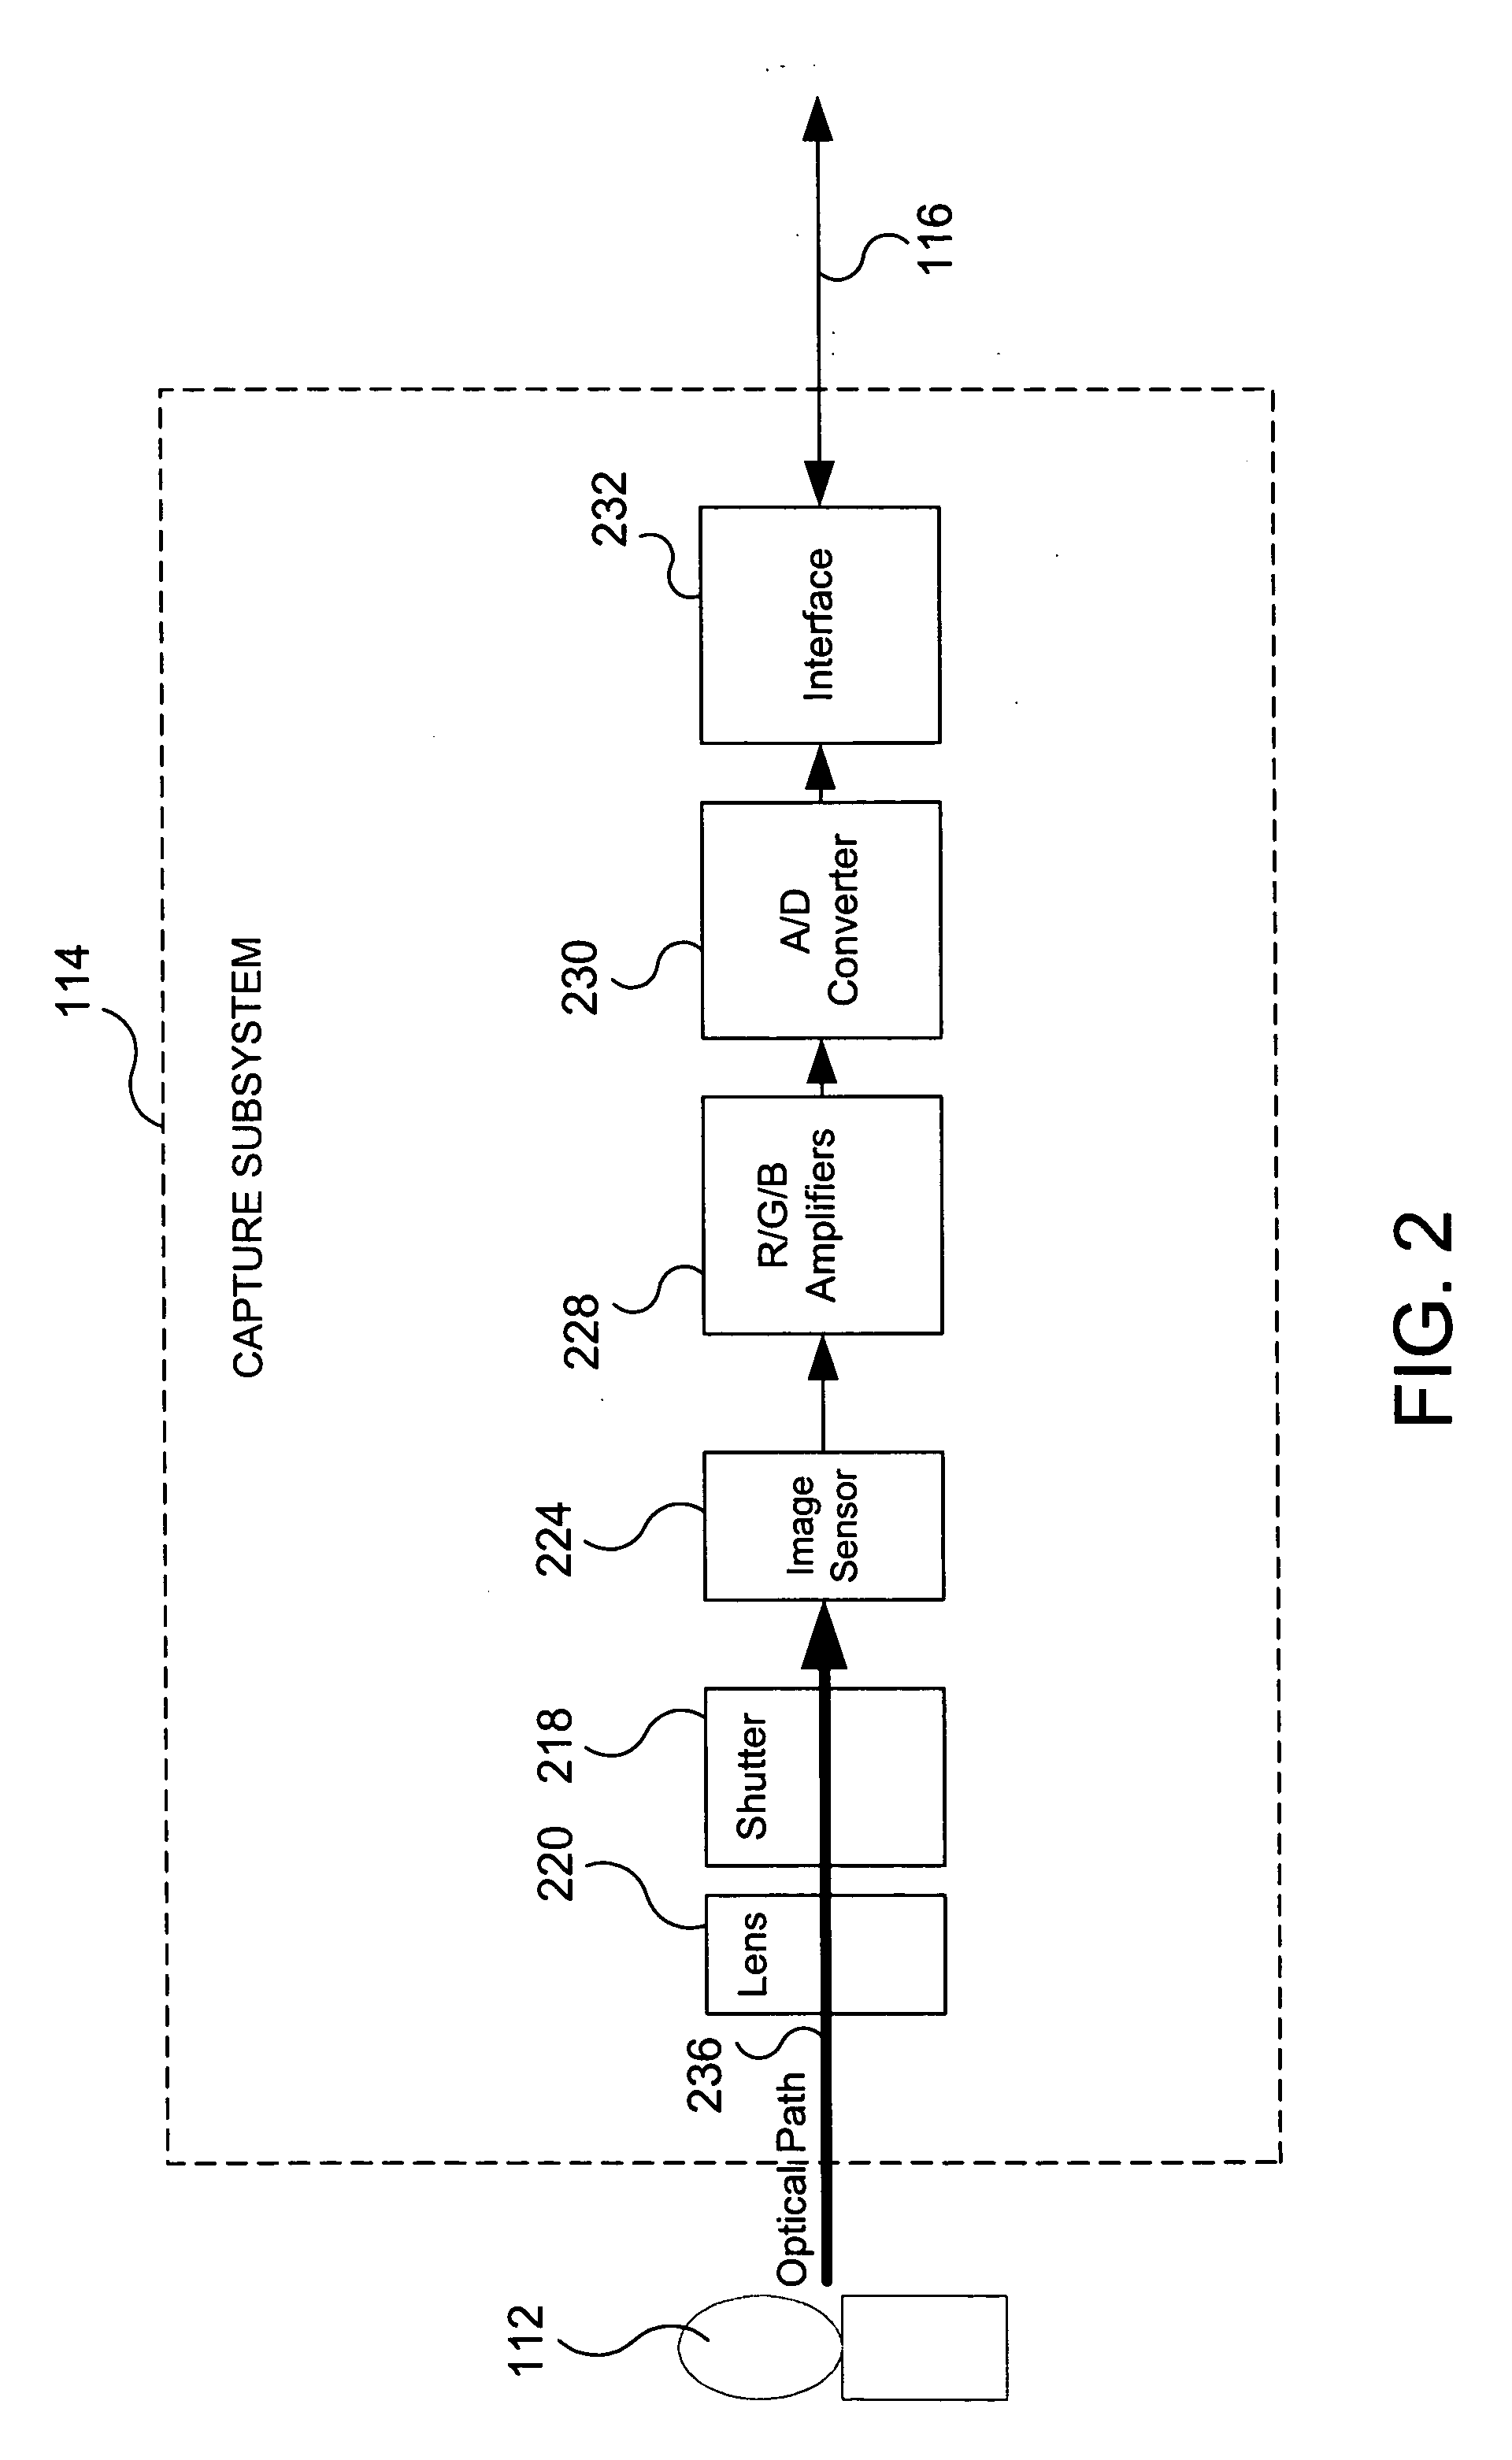 System and method for efficiently performing a depth map recovery procedure